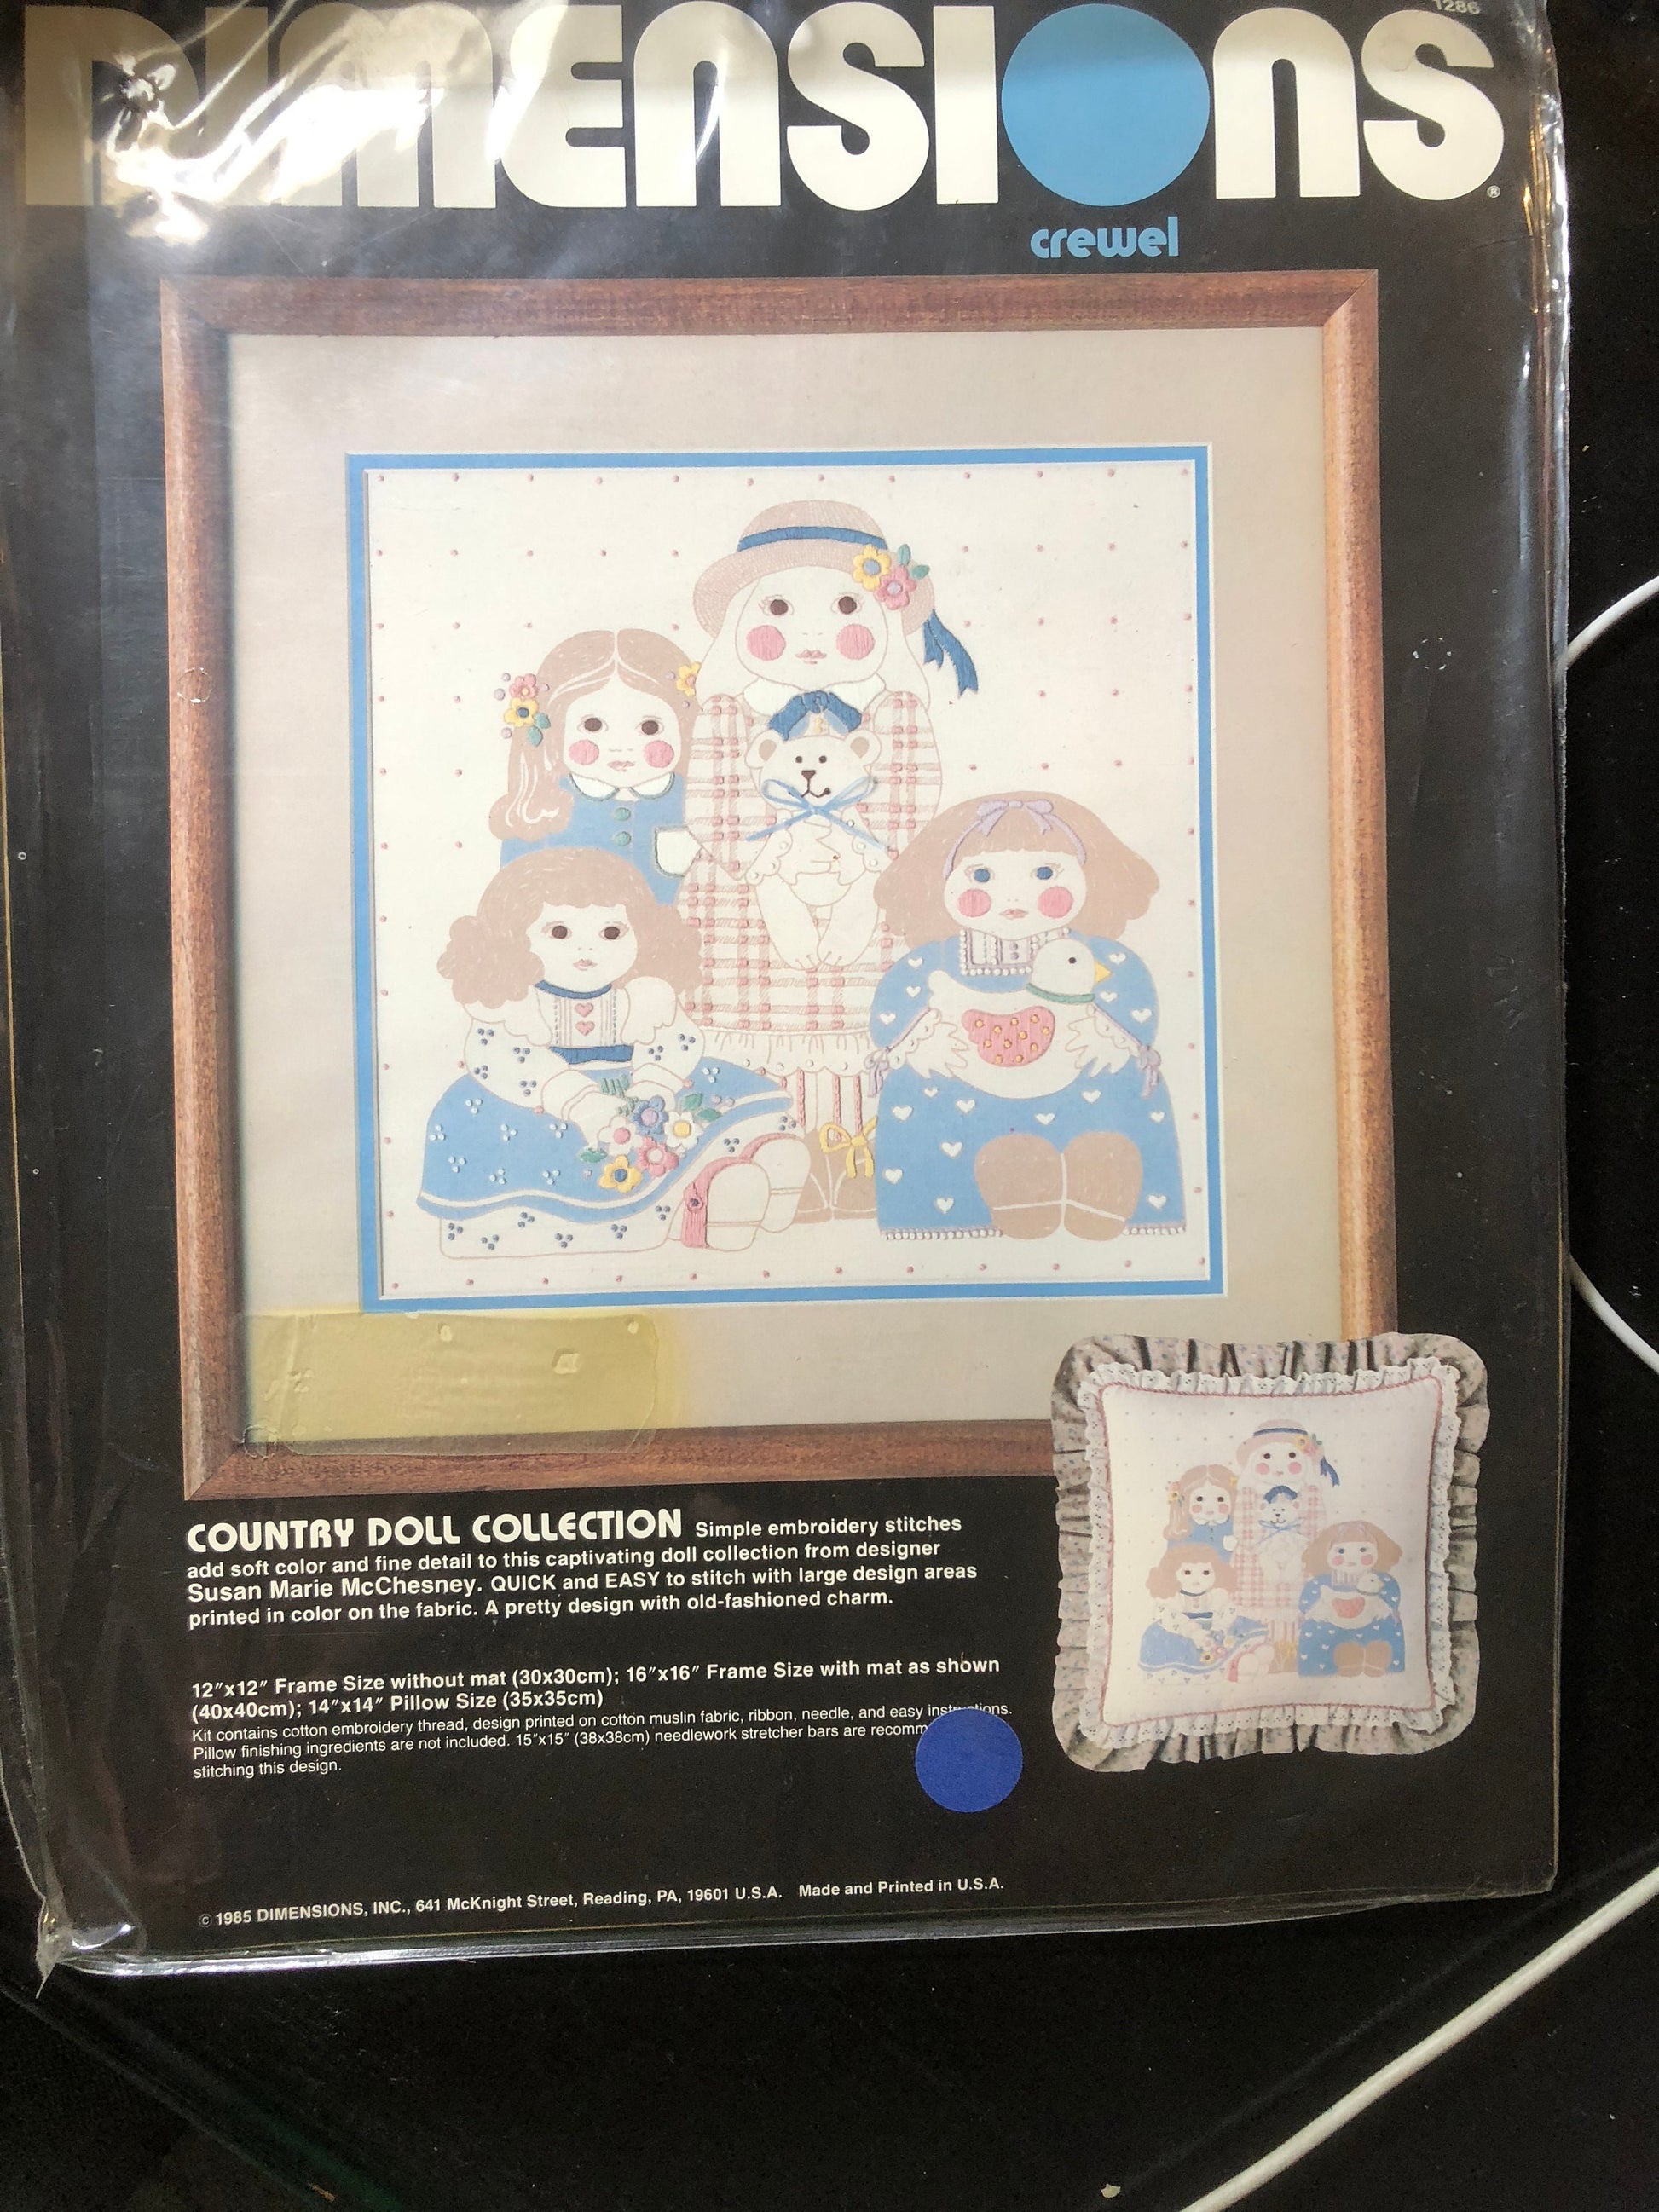 Dimensions, Country Doll Collection, 12 by 12 inch, Design Printed on Cotton Muslin Fabric, Vintage 1985, Crewel Kit*